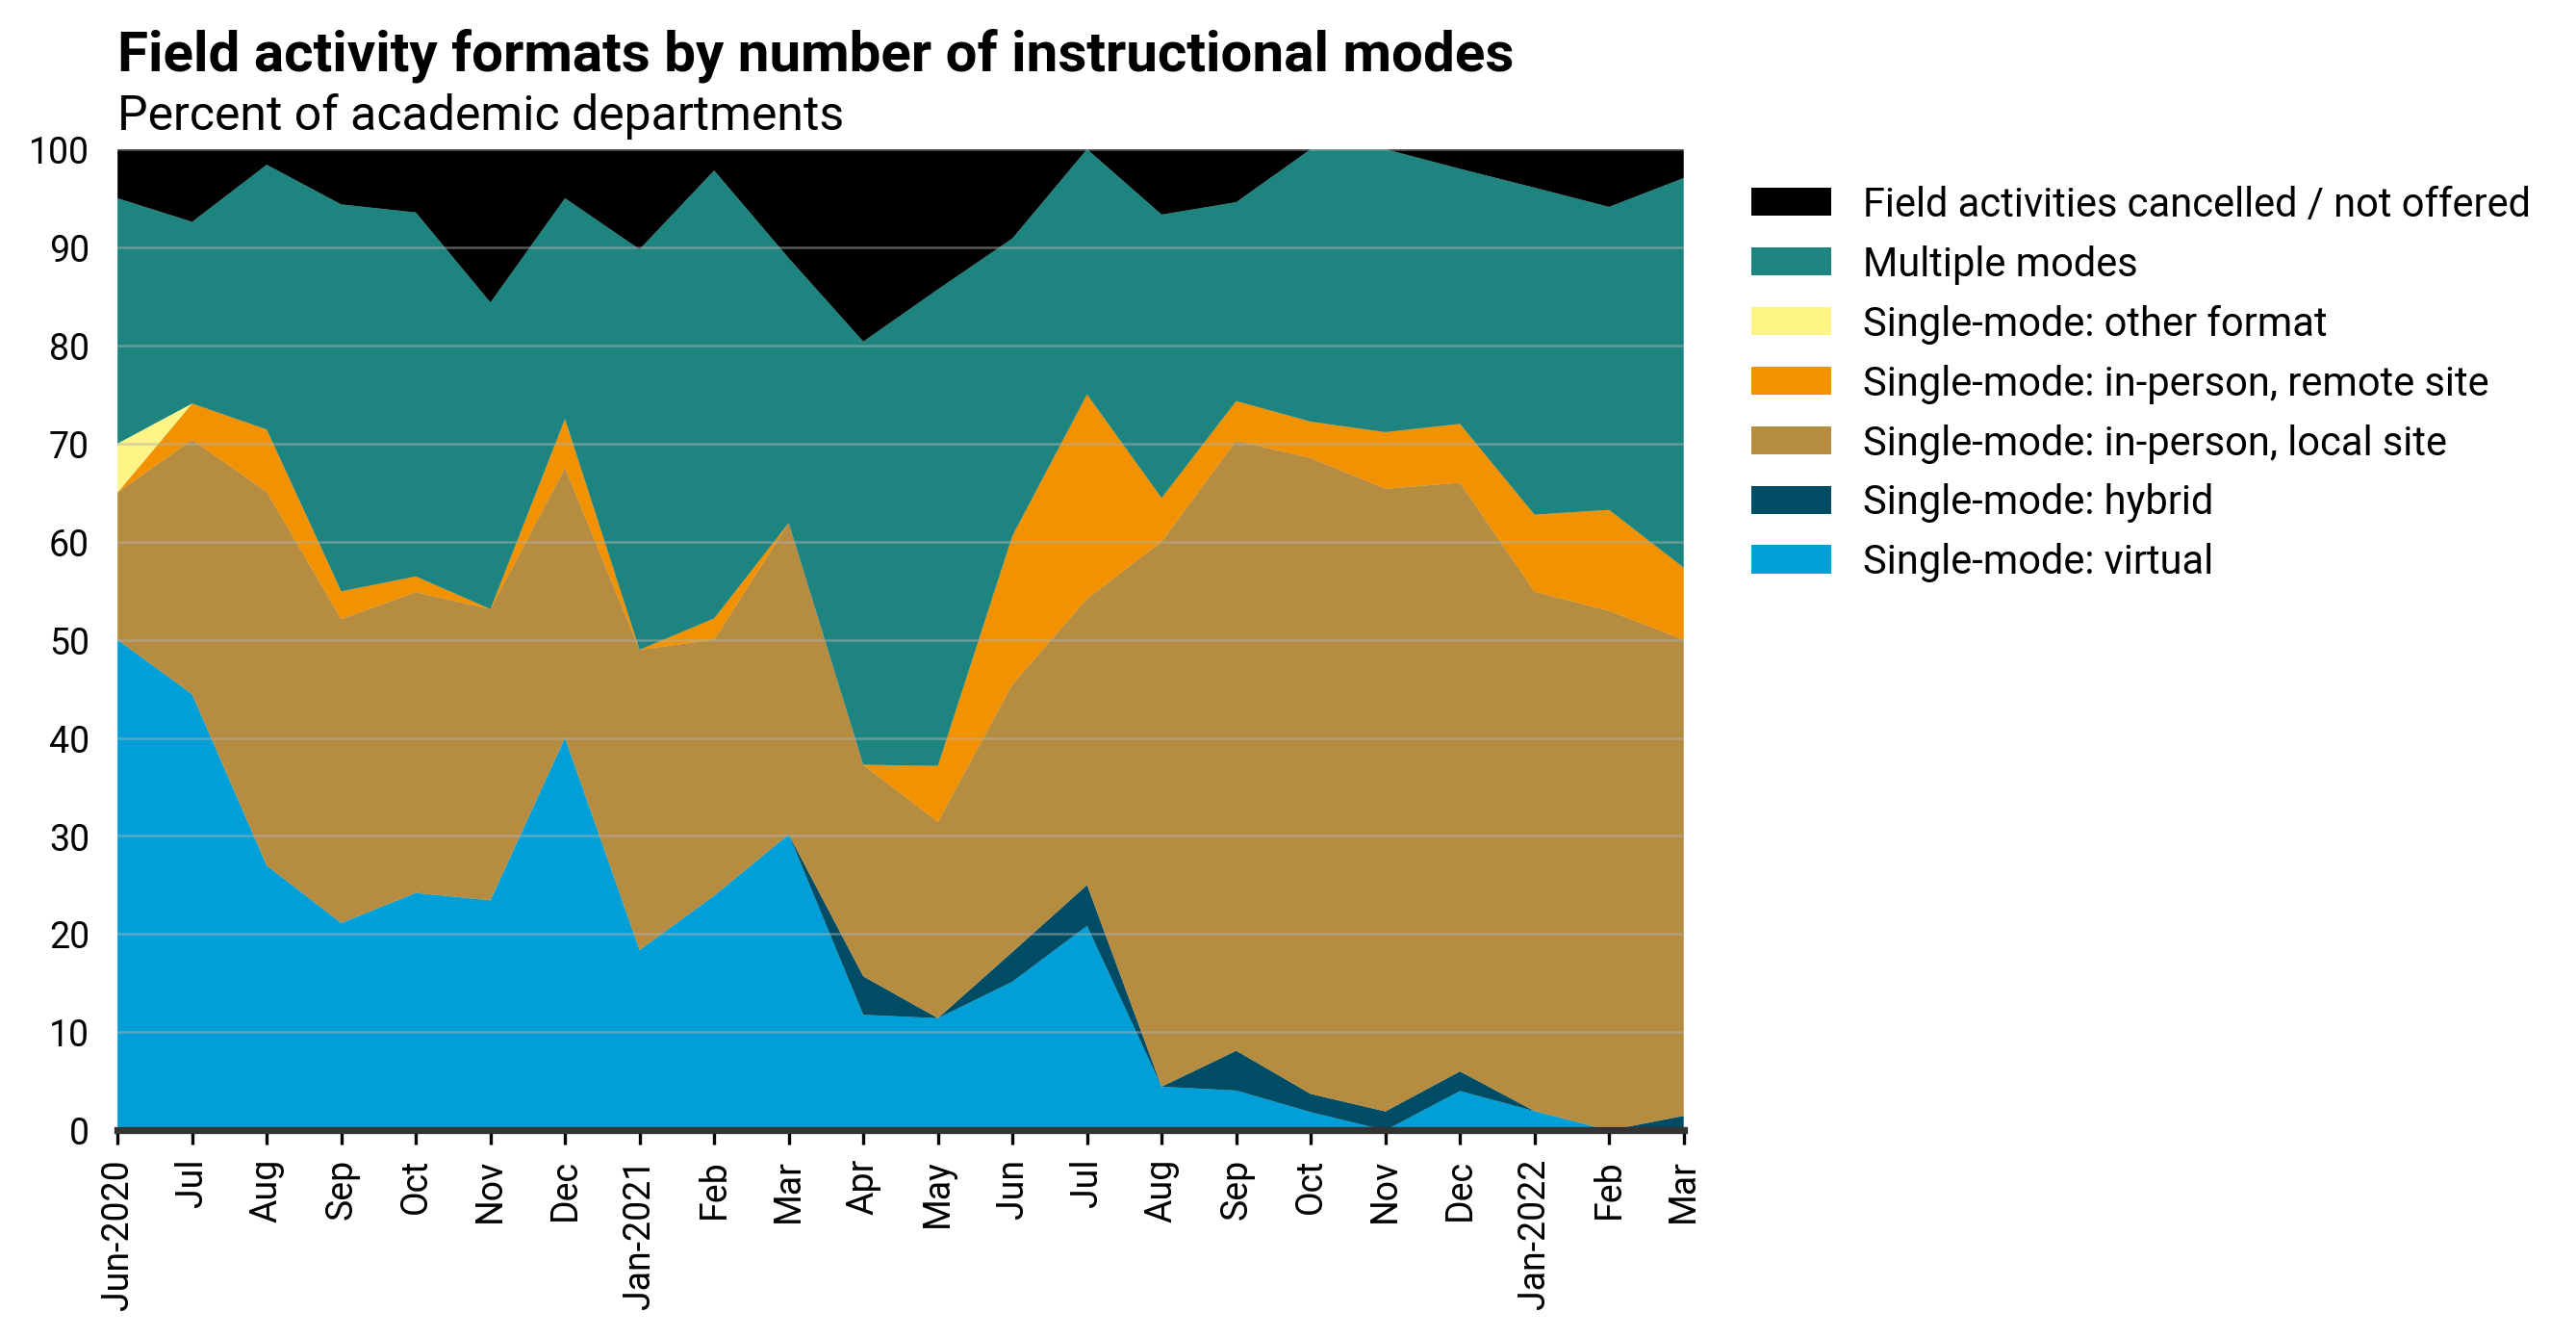 DB_2022-004 chart 06: Field activity formats by number of instructional modes (Credit: AGI; data from AGI&#039;s Geoscience COVID-19 Survey)